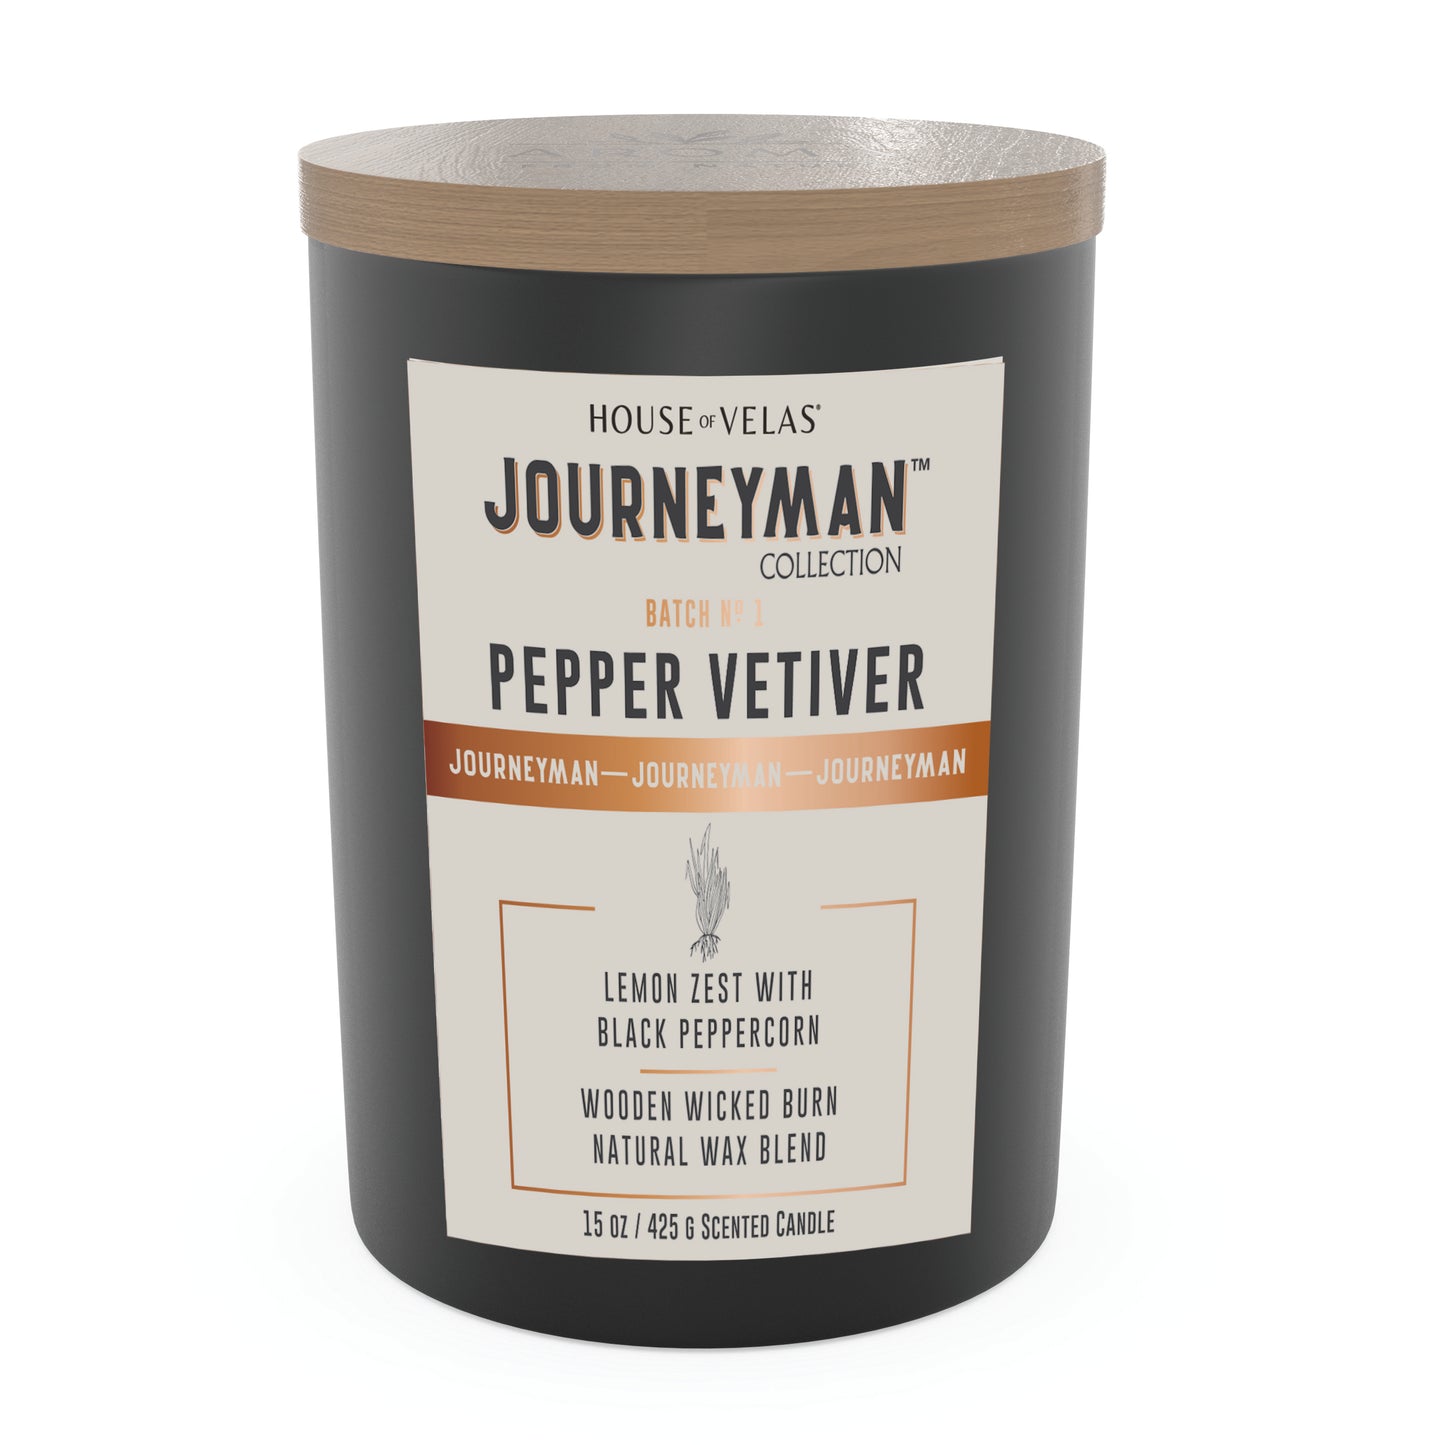 Journeyman by House of Velas - Pepper Vetiver Scented Candle, 15oz